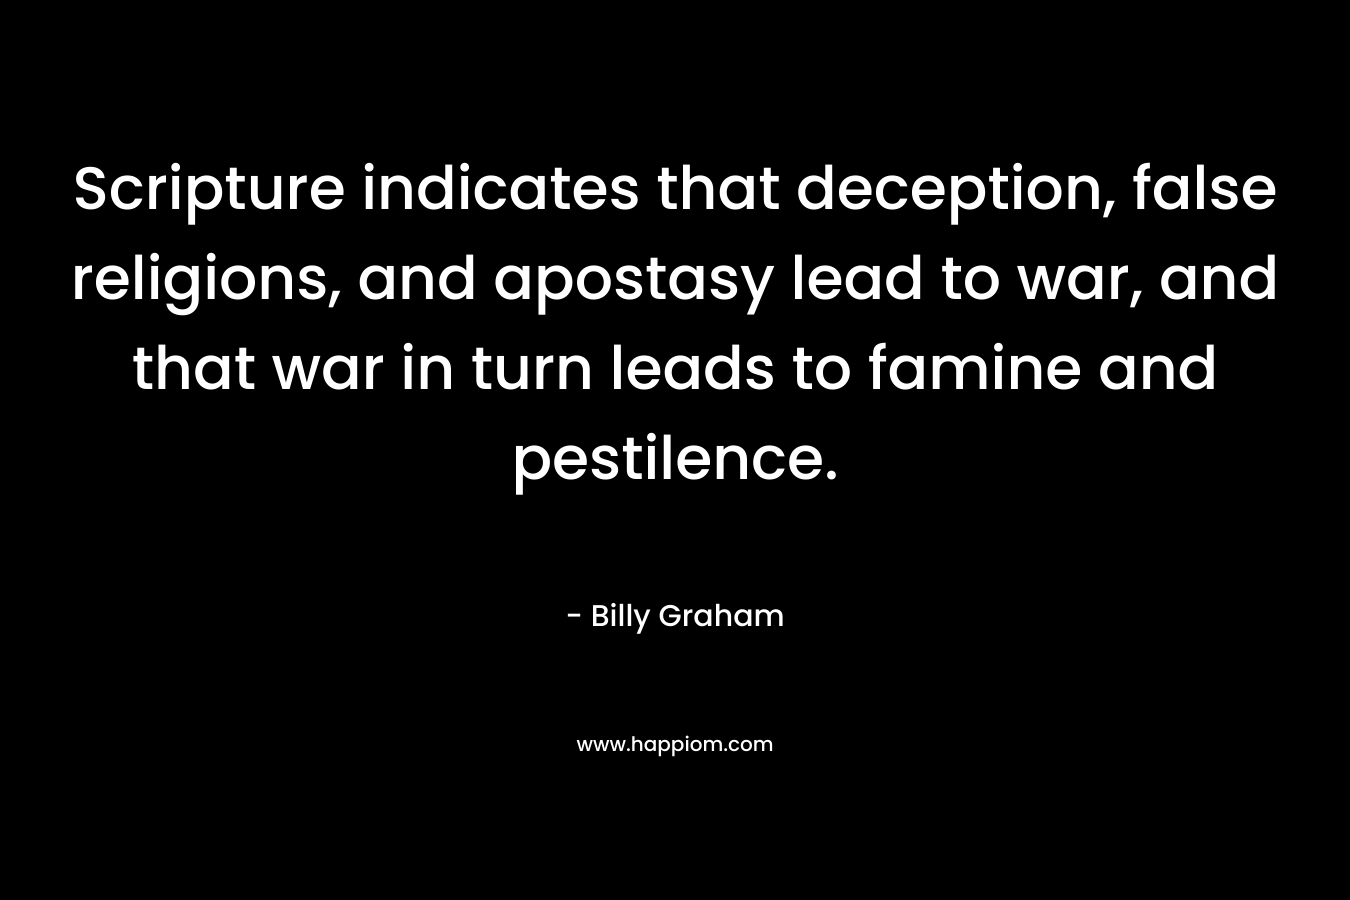 Scripture indicates that deception, false religions, and apostasy lead to war, and that war in turn leads to famine and pestilence. – Billy Graham